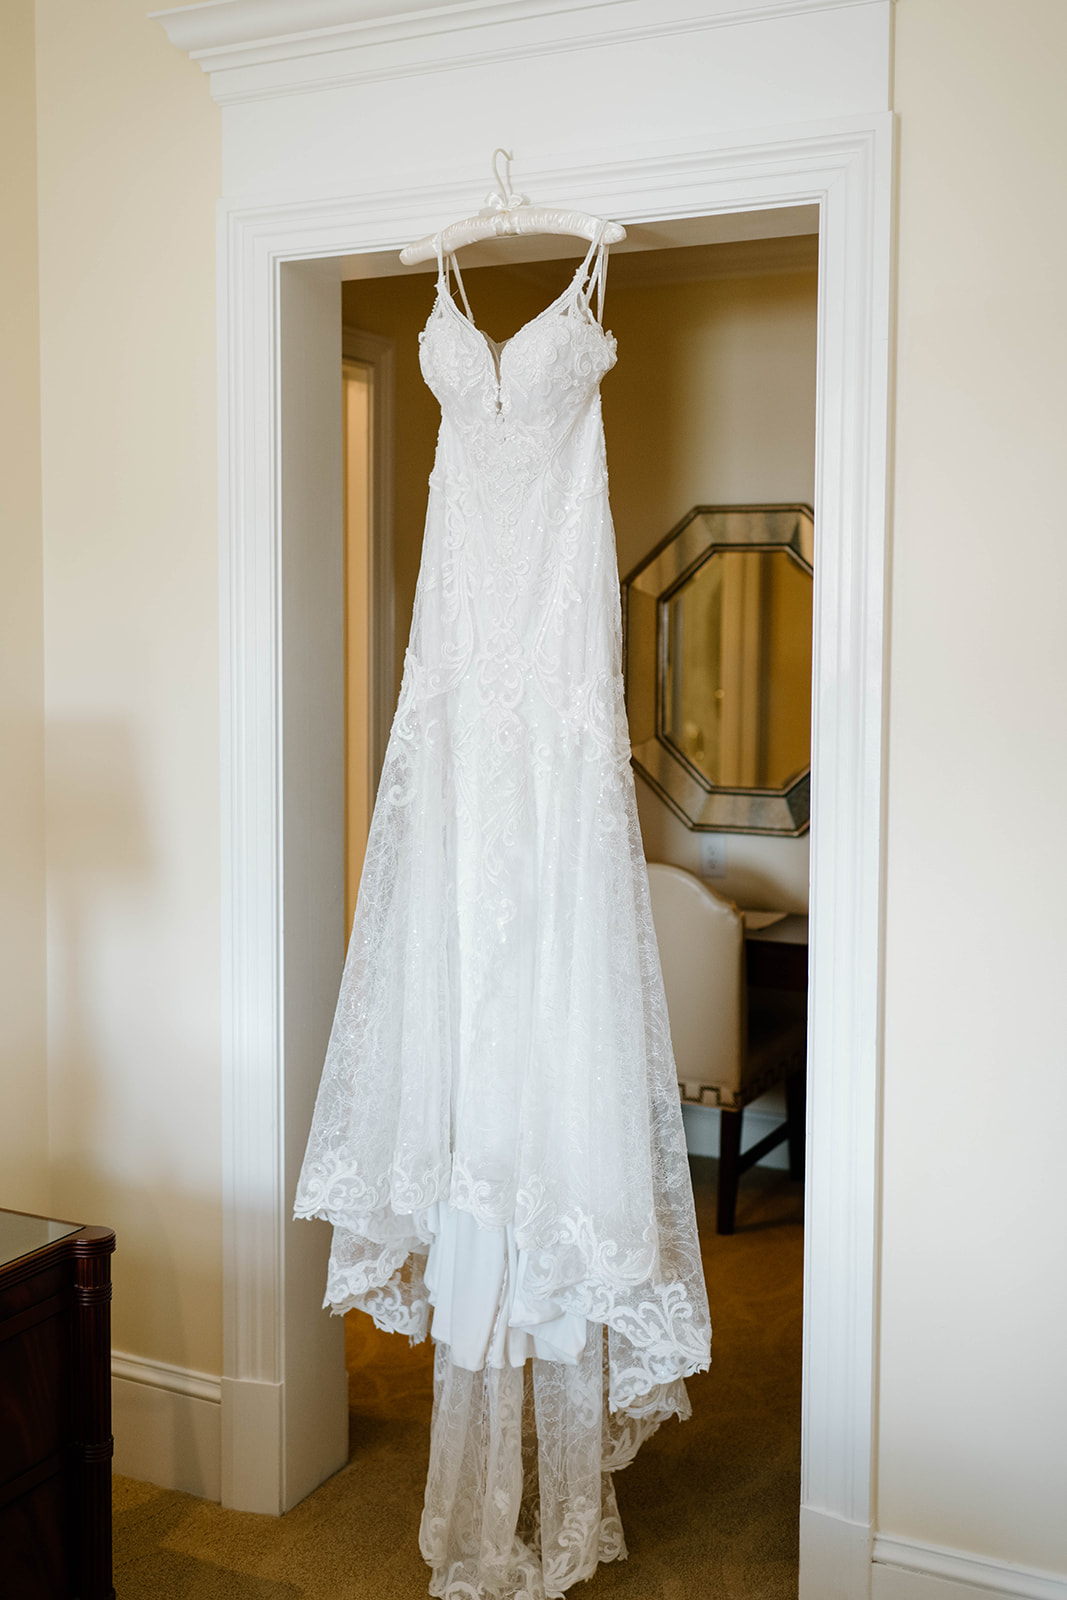 Photo Of Wedding Dress Preservation Lace Wedding Dress Called Esther By Maggie Sottero